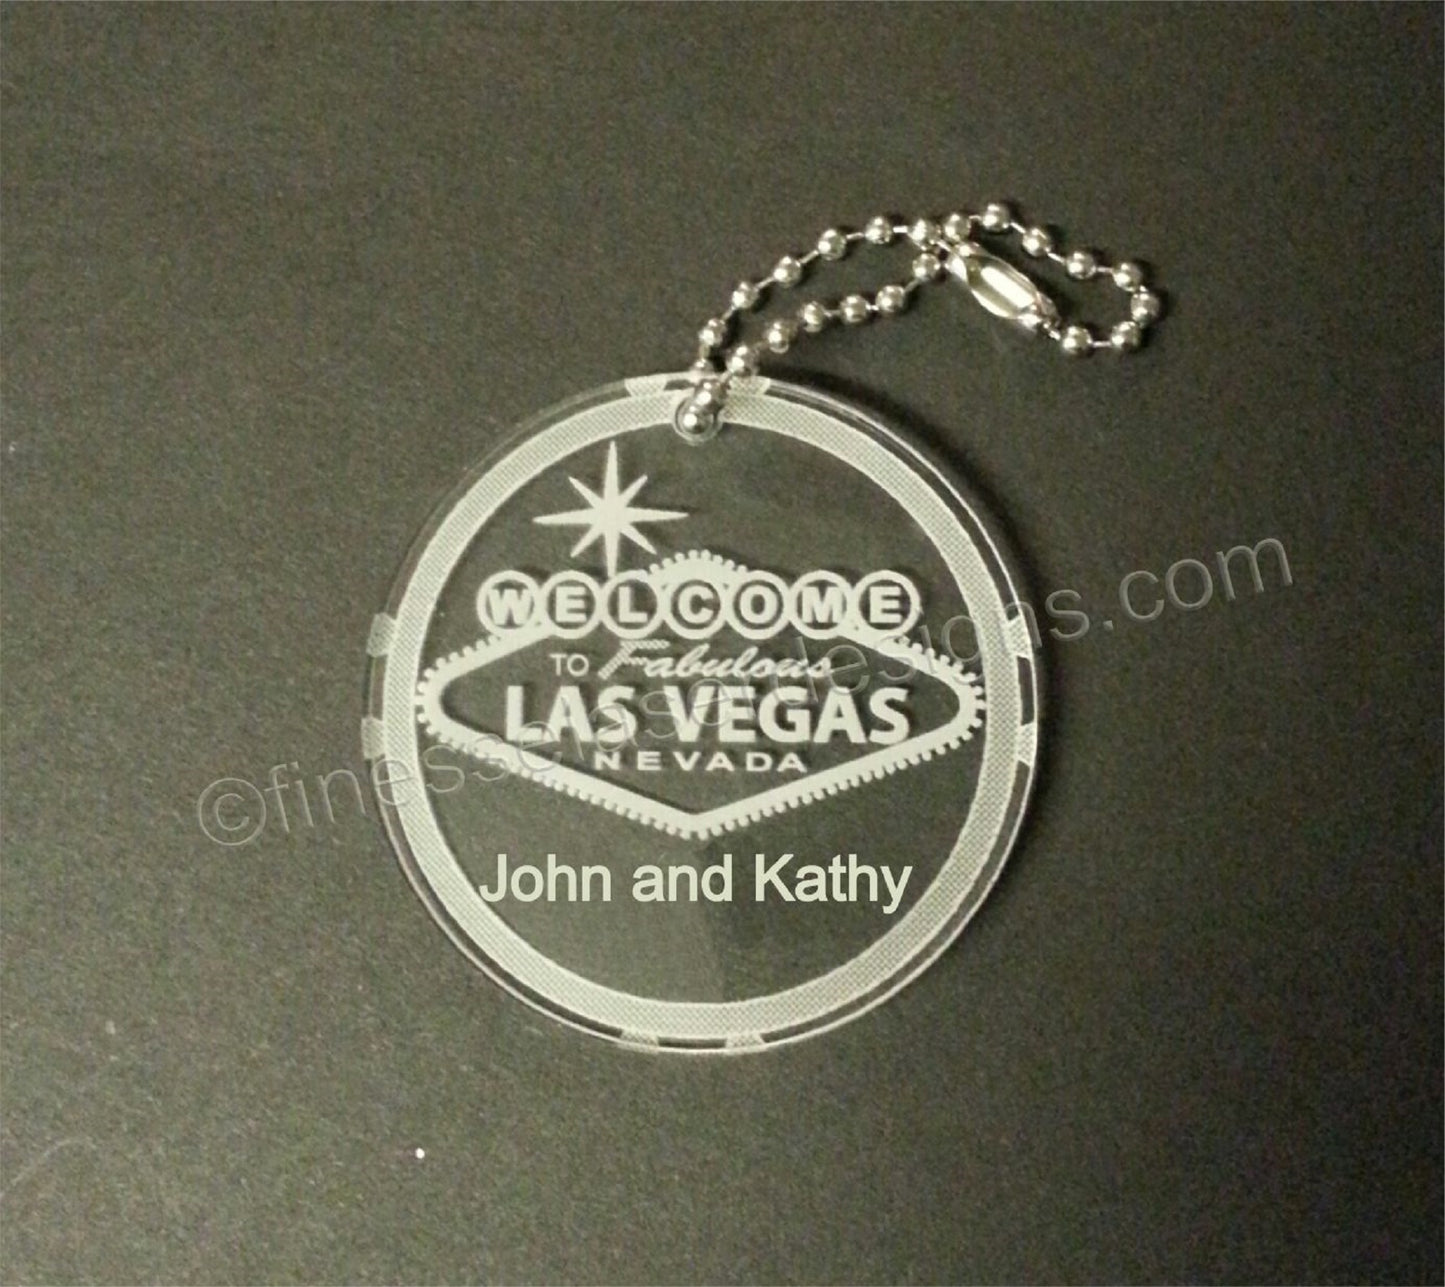 Round Welcome to Las Vegas keychain with names